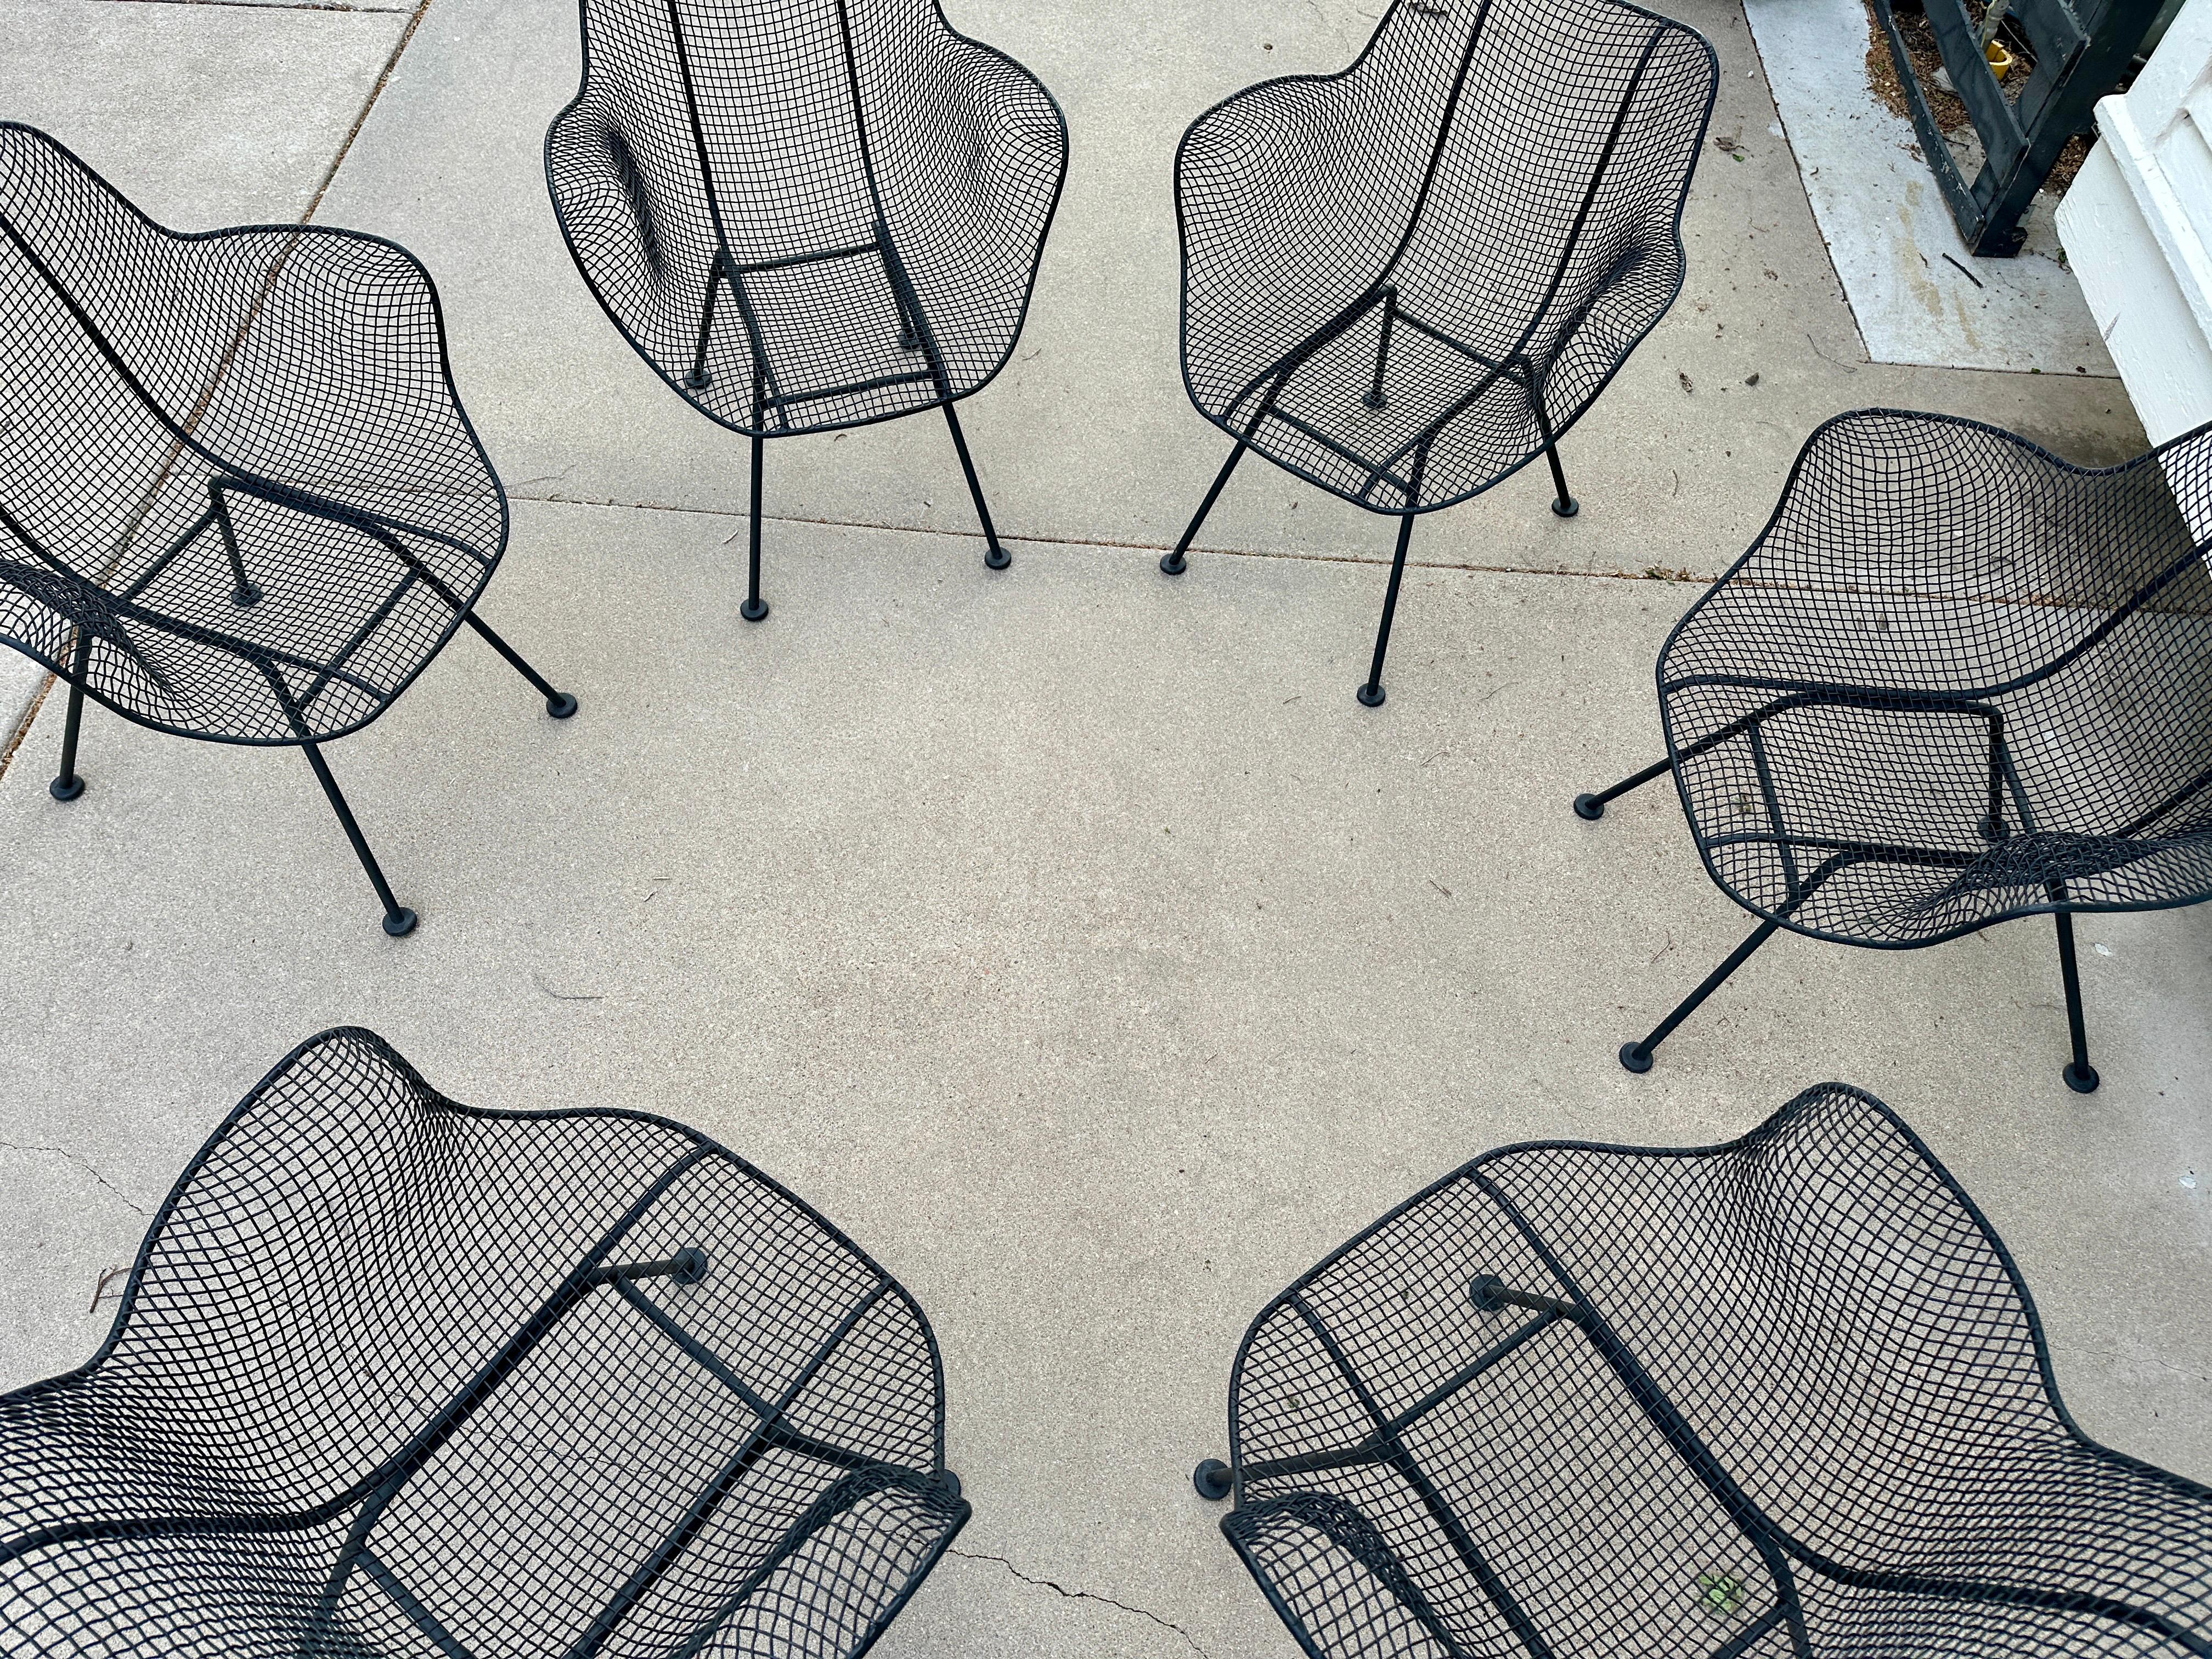 These beautiful Mid-Century Woodard Sculptura Chairs are hard to find in this quantity and in such great condition - the chairs have been recently powder coated and are in wonderful shape. This collection is handcrafted of iron wire mesh that evokes